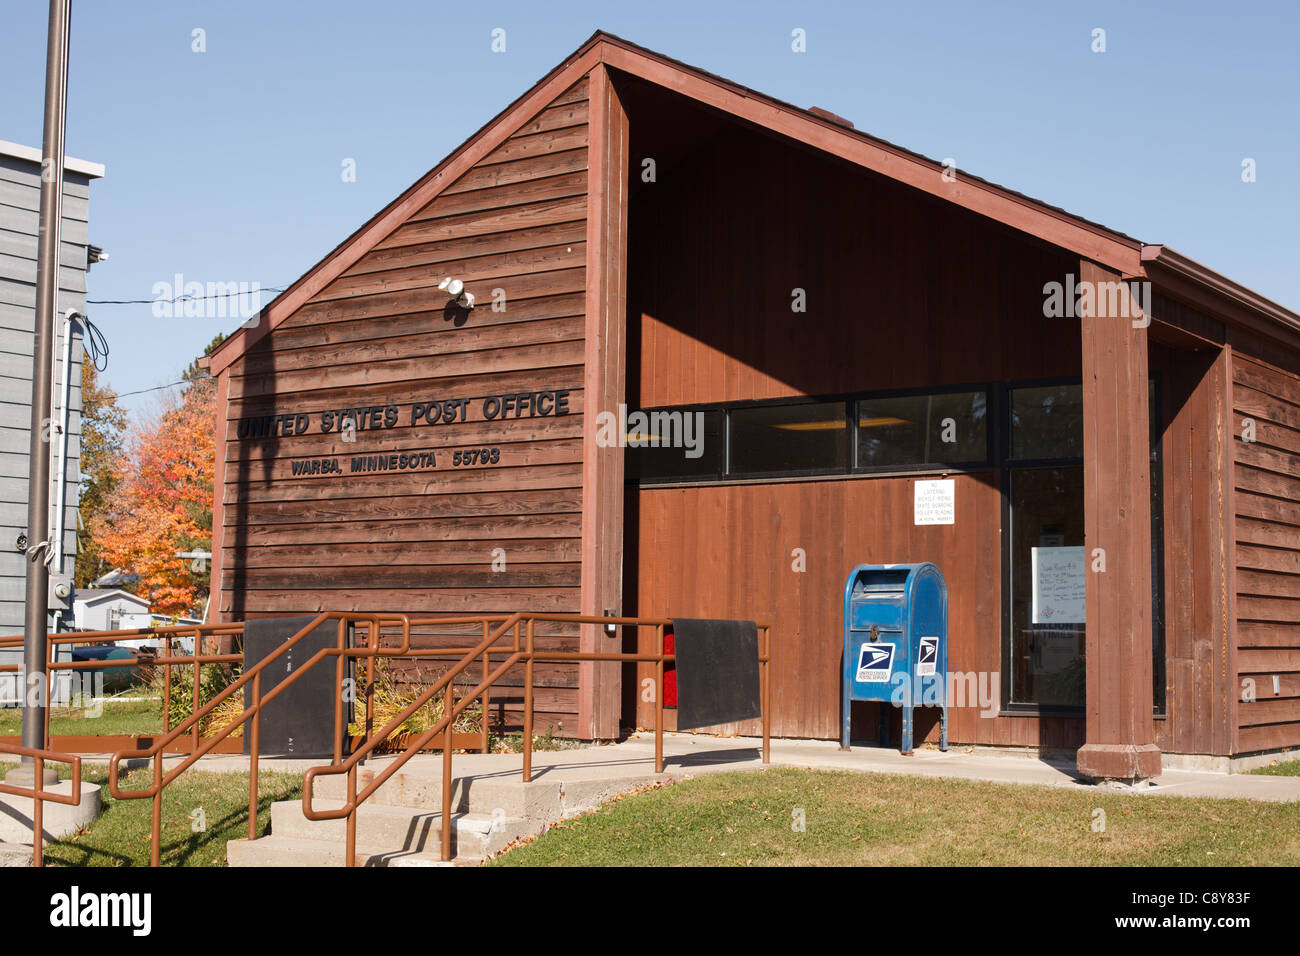 A rural post office in Warba, Minnesota, USA. Stock Photo